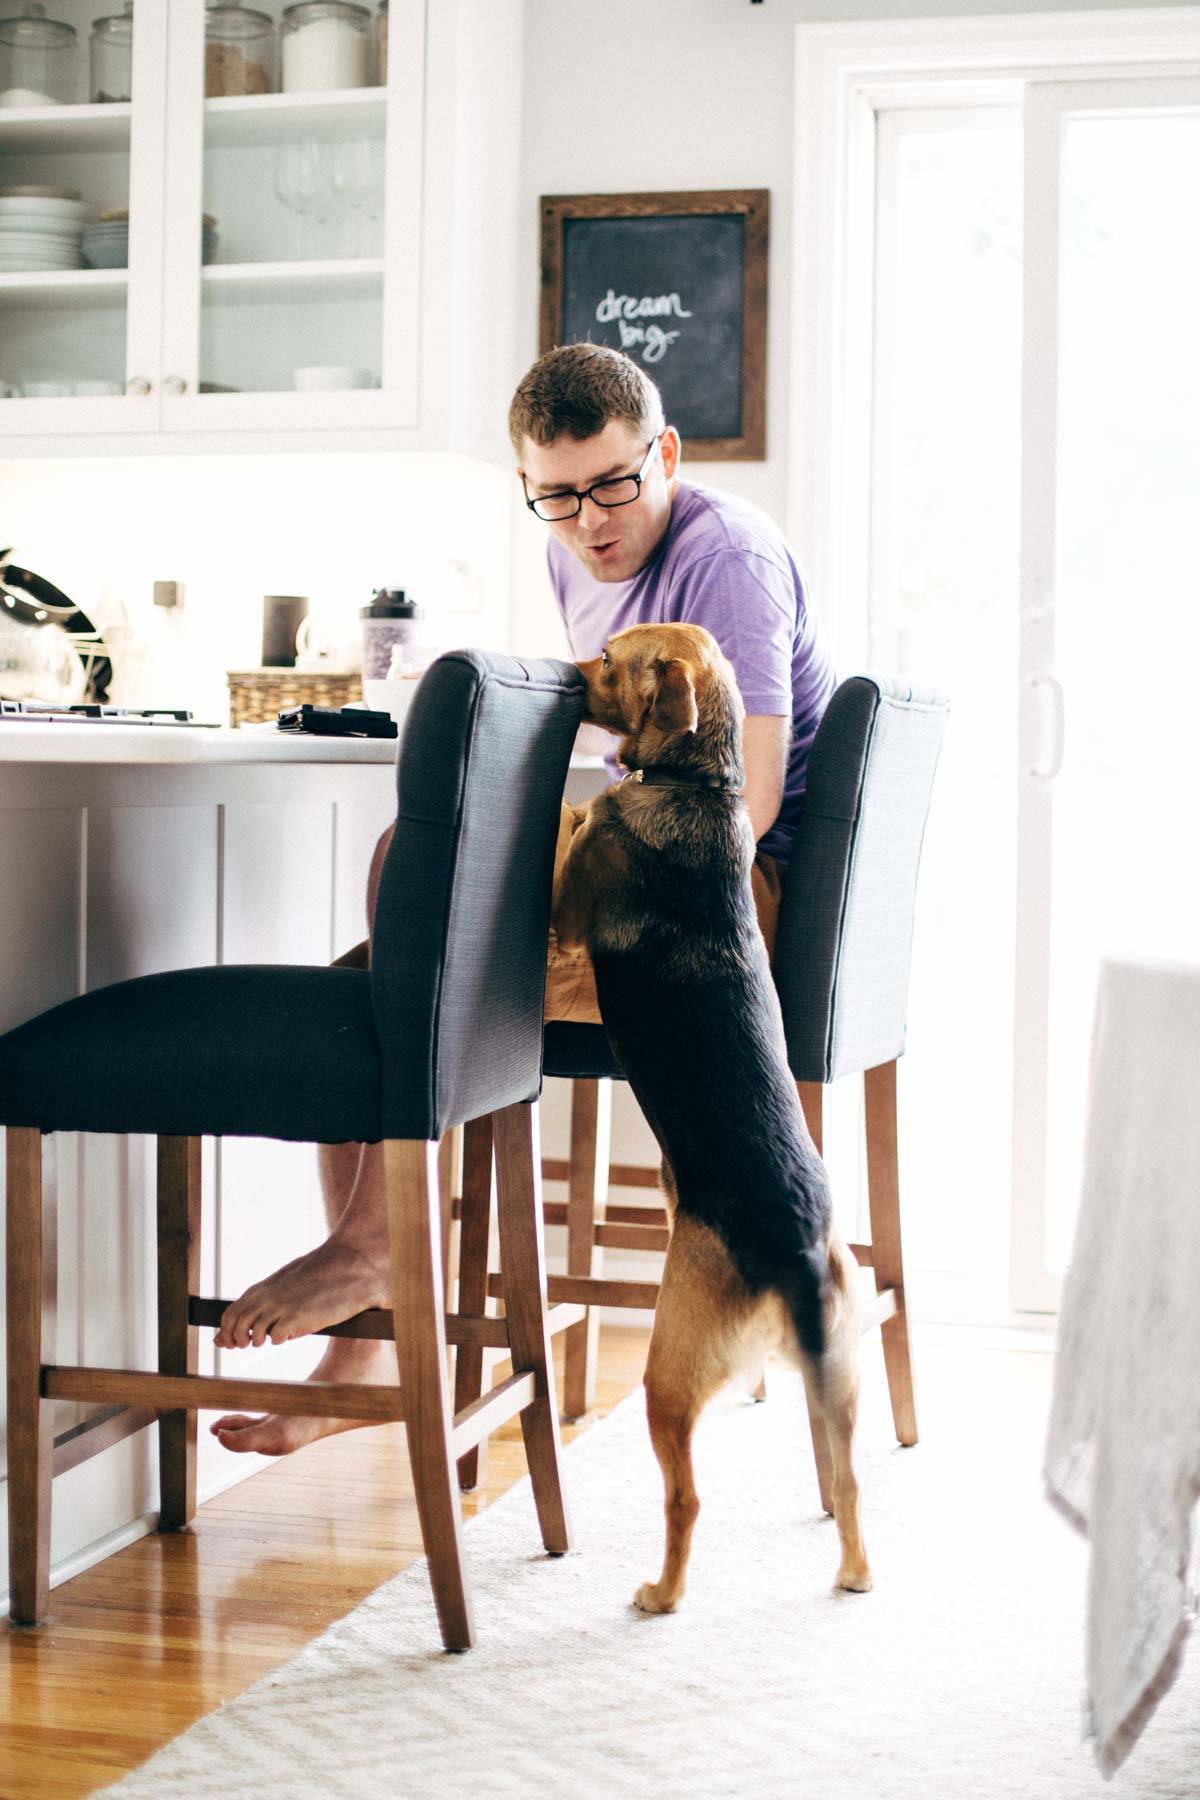 Man and dog in a kitchen.